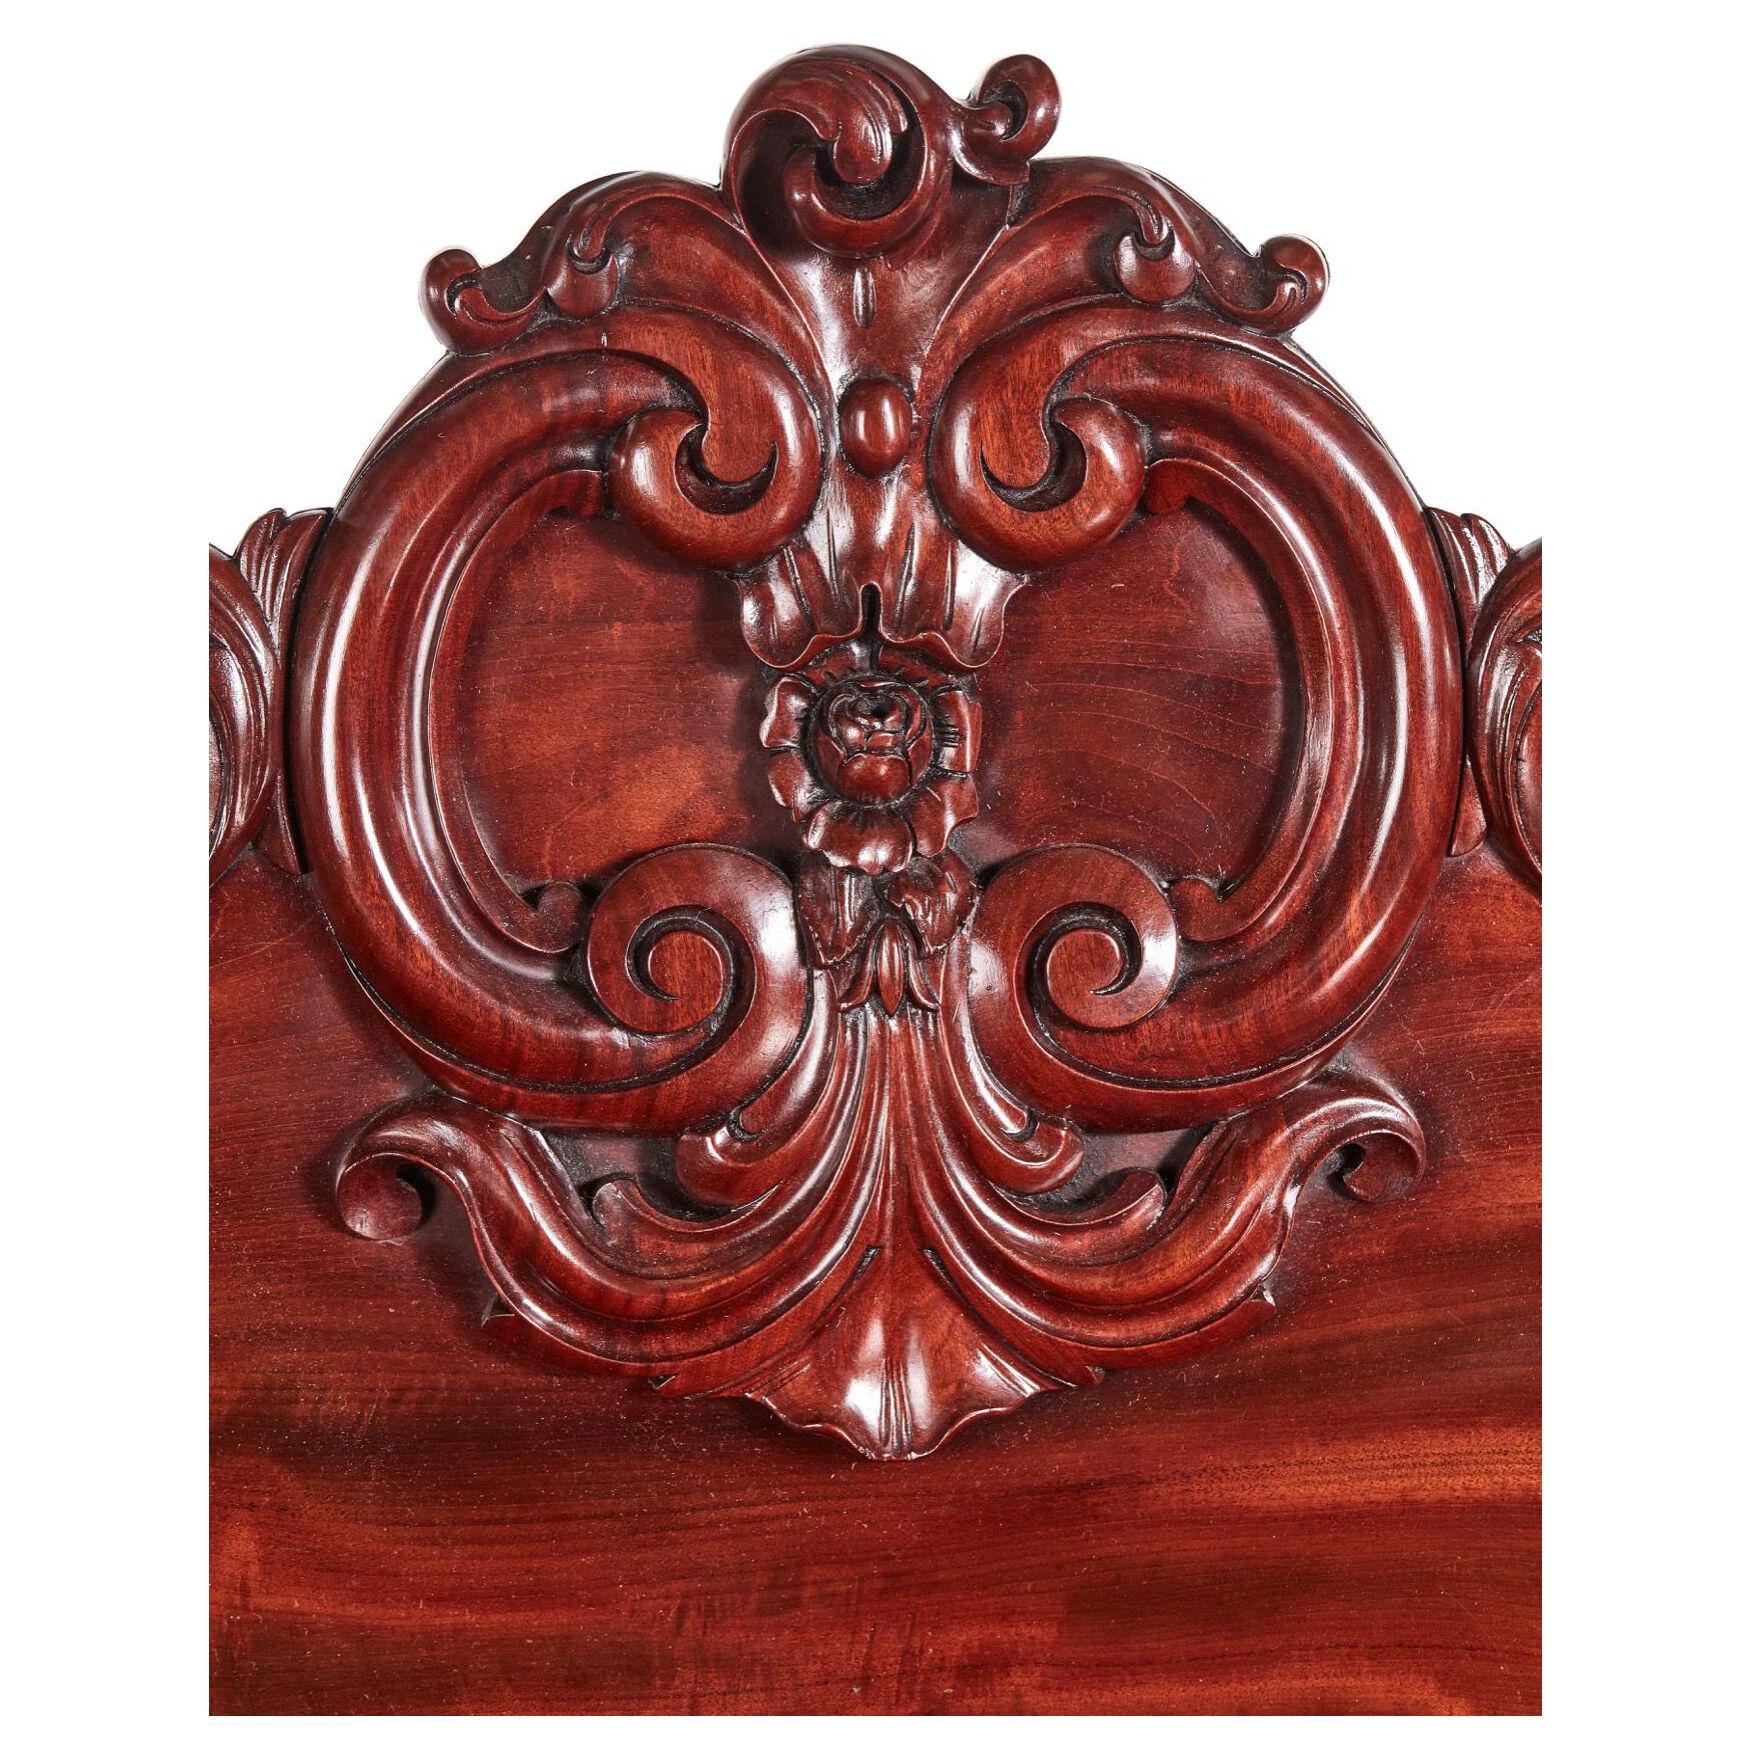 Splendid Quality Antique Victorian Carved Mahogany Sideboard